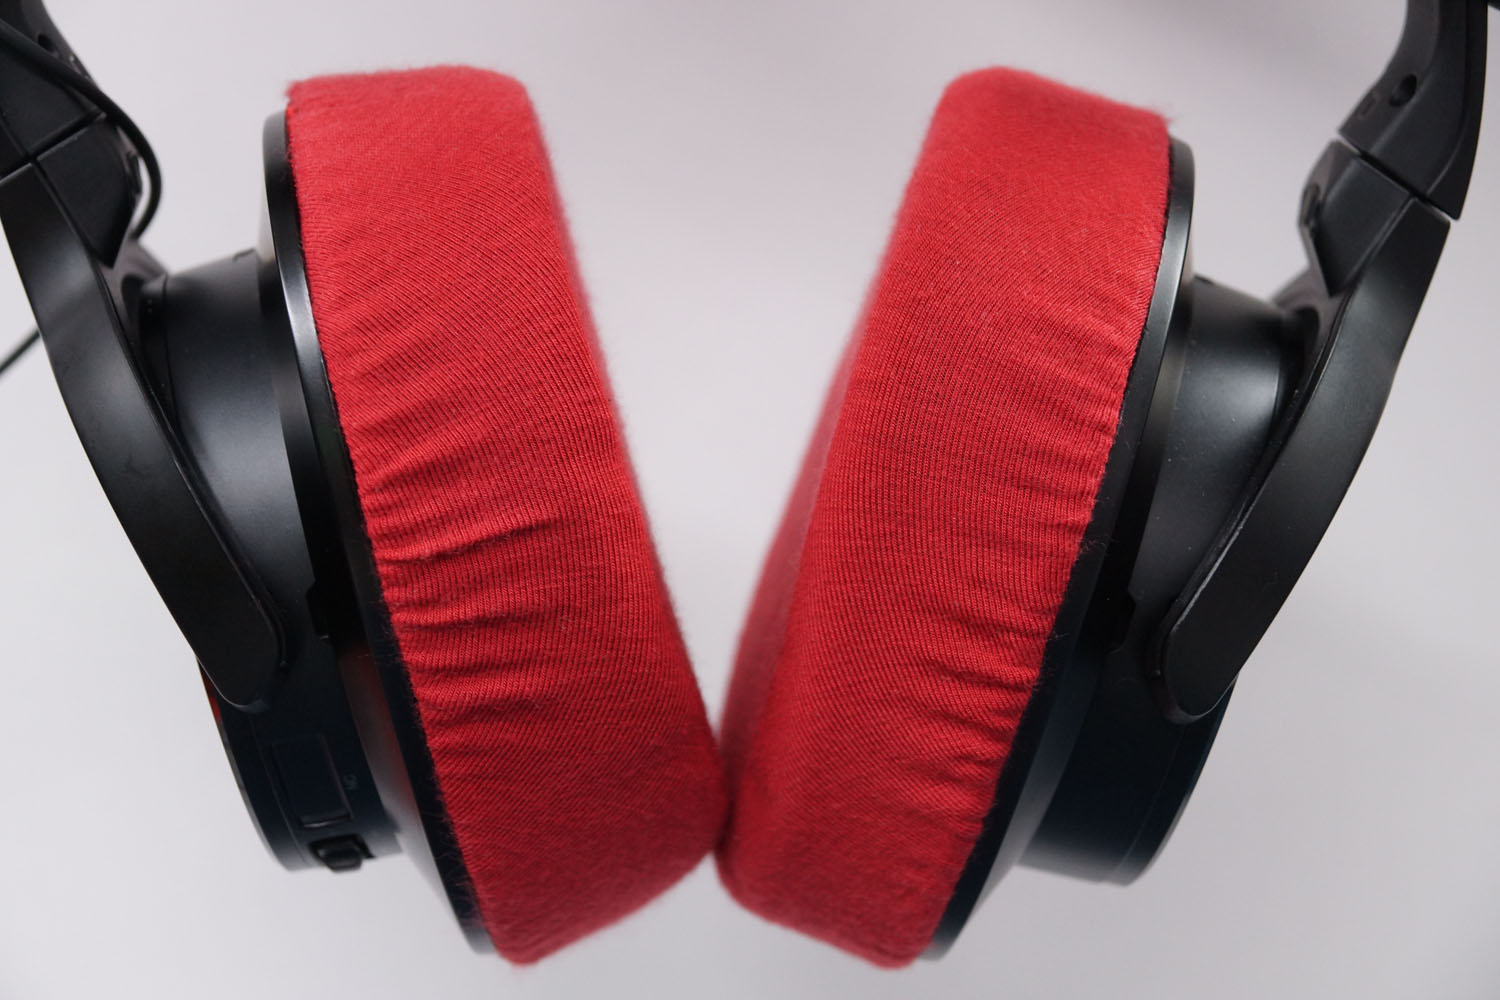 audio technica ATH WSBT earpad repair and protection: Super